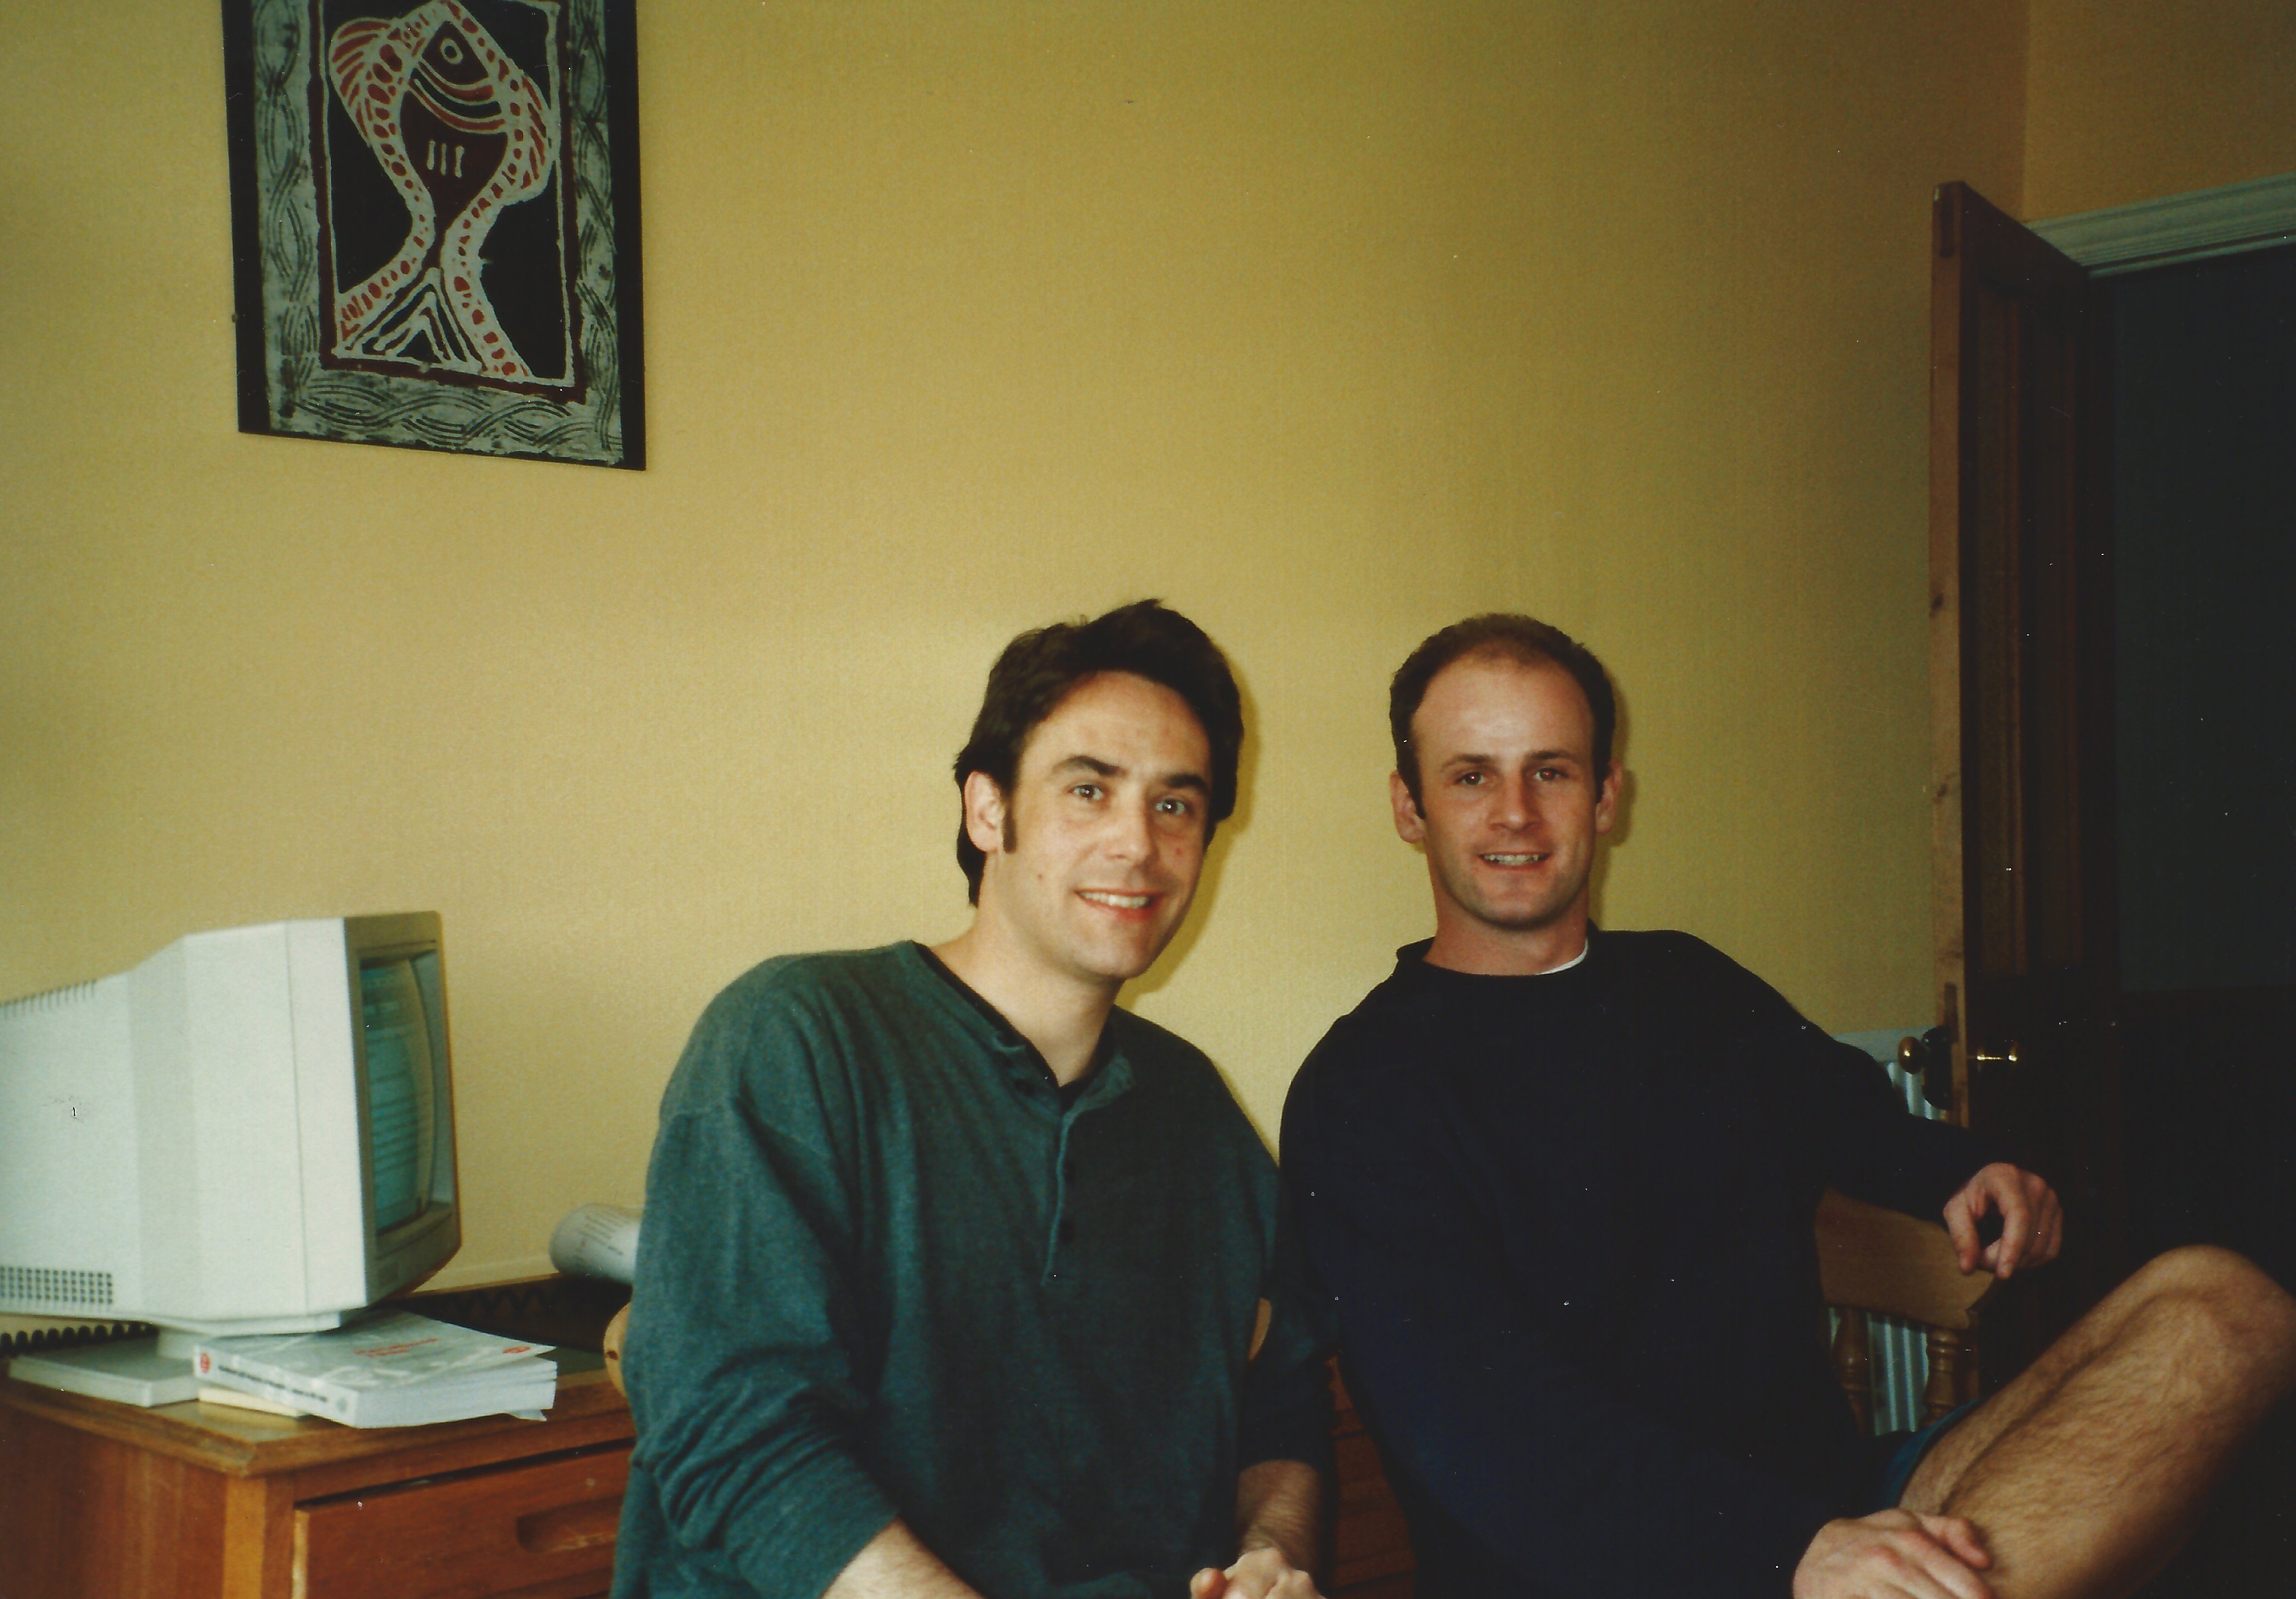 Clive and Steve in their first Redbrick office (1996)